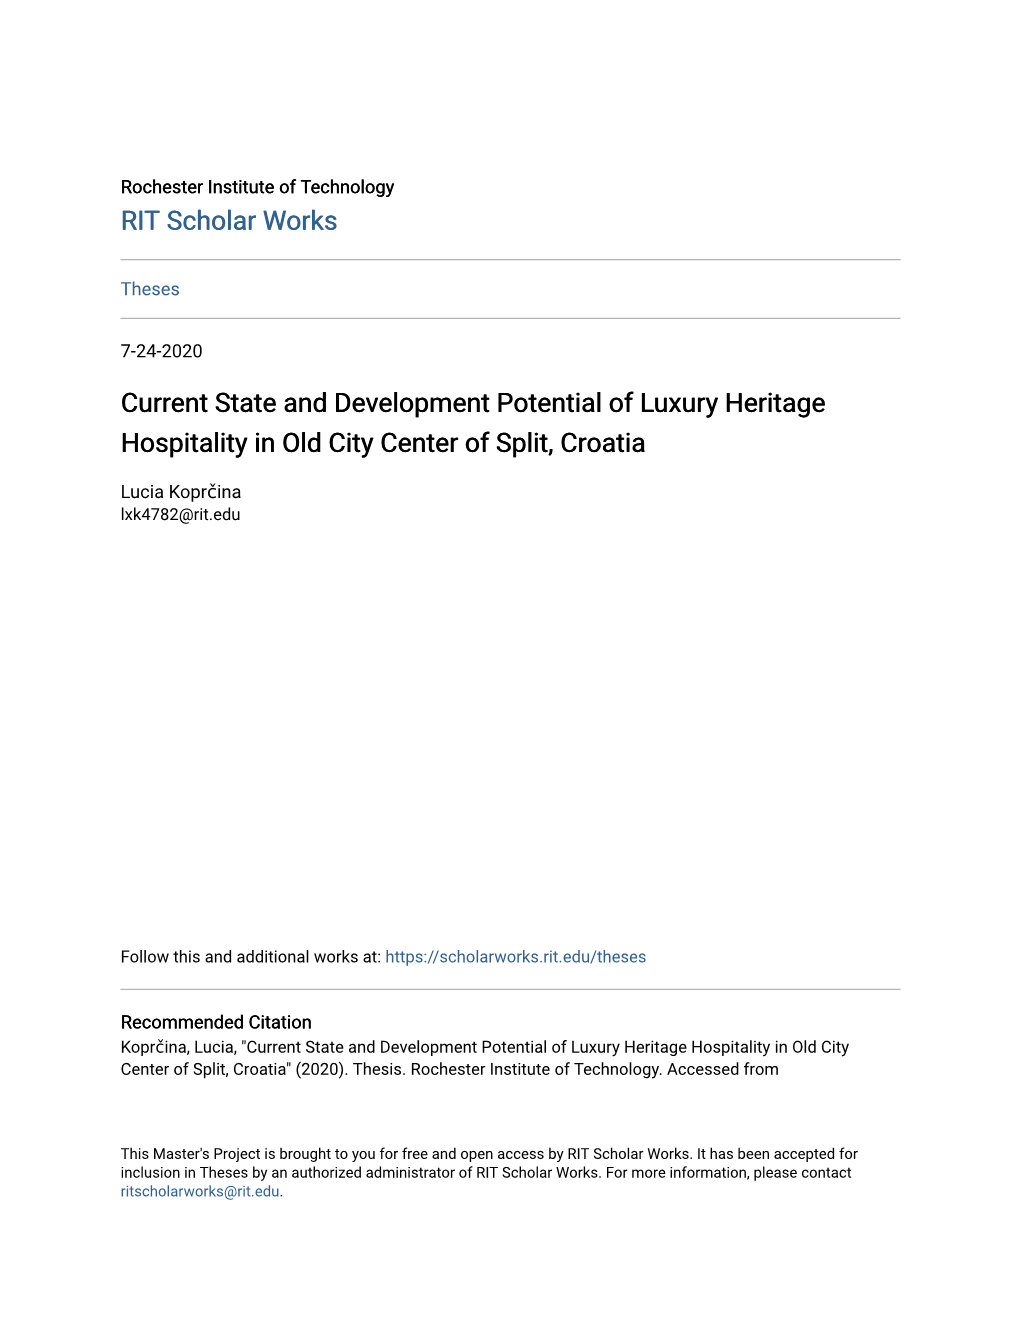 Current State and Development Potential of Luxury Heritage Hospitality in Old City Center of Split, Croatia